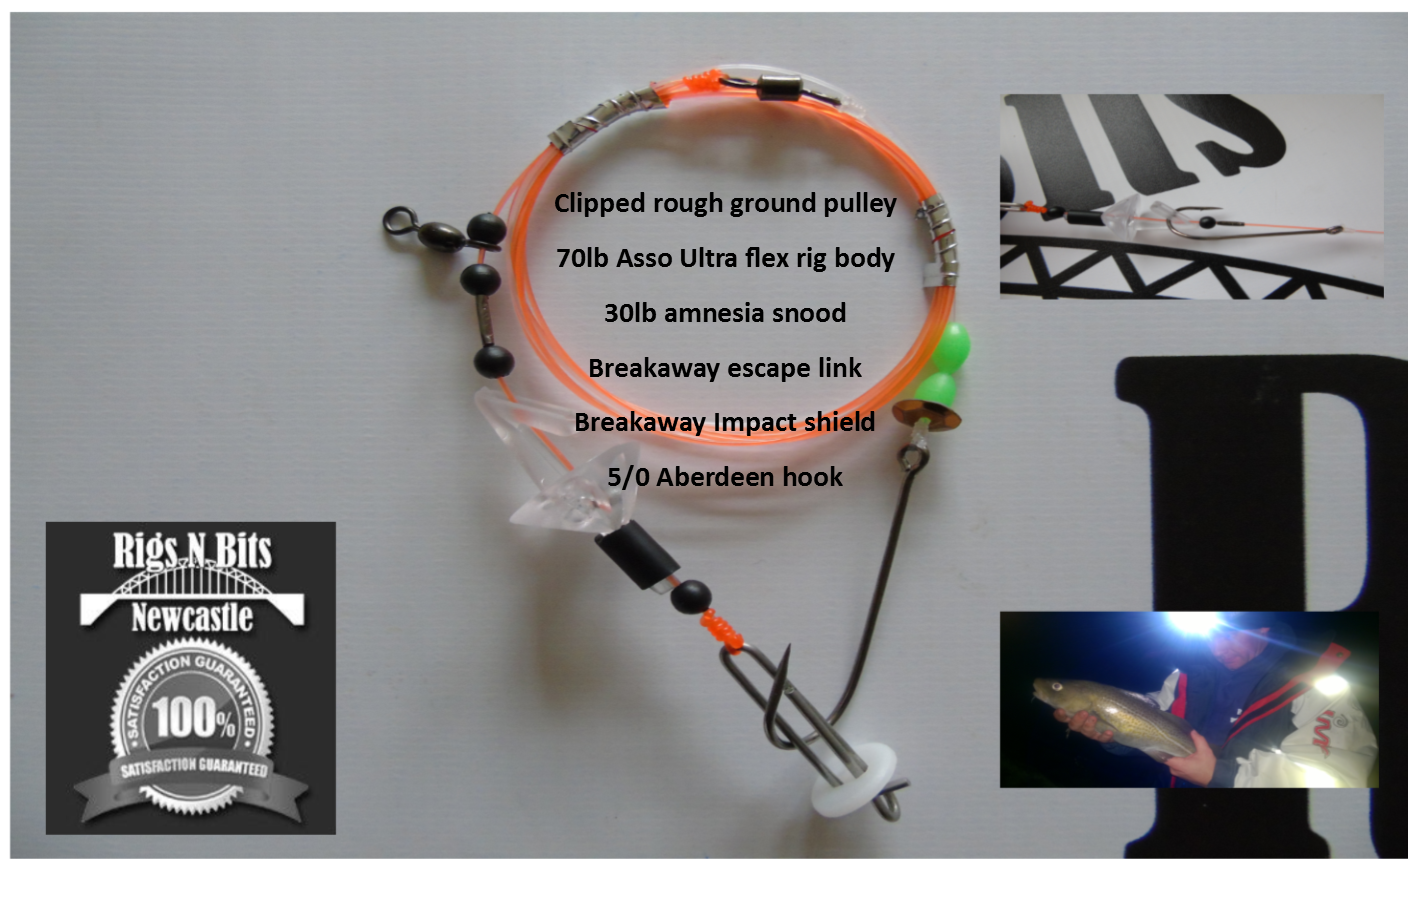 quality big bait winter Shore rigs Details about   Sea fishing Rigs x 25 Pulleys Pennels Cod 